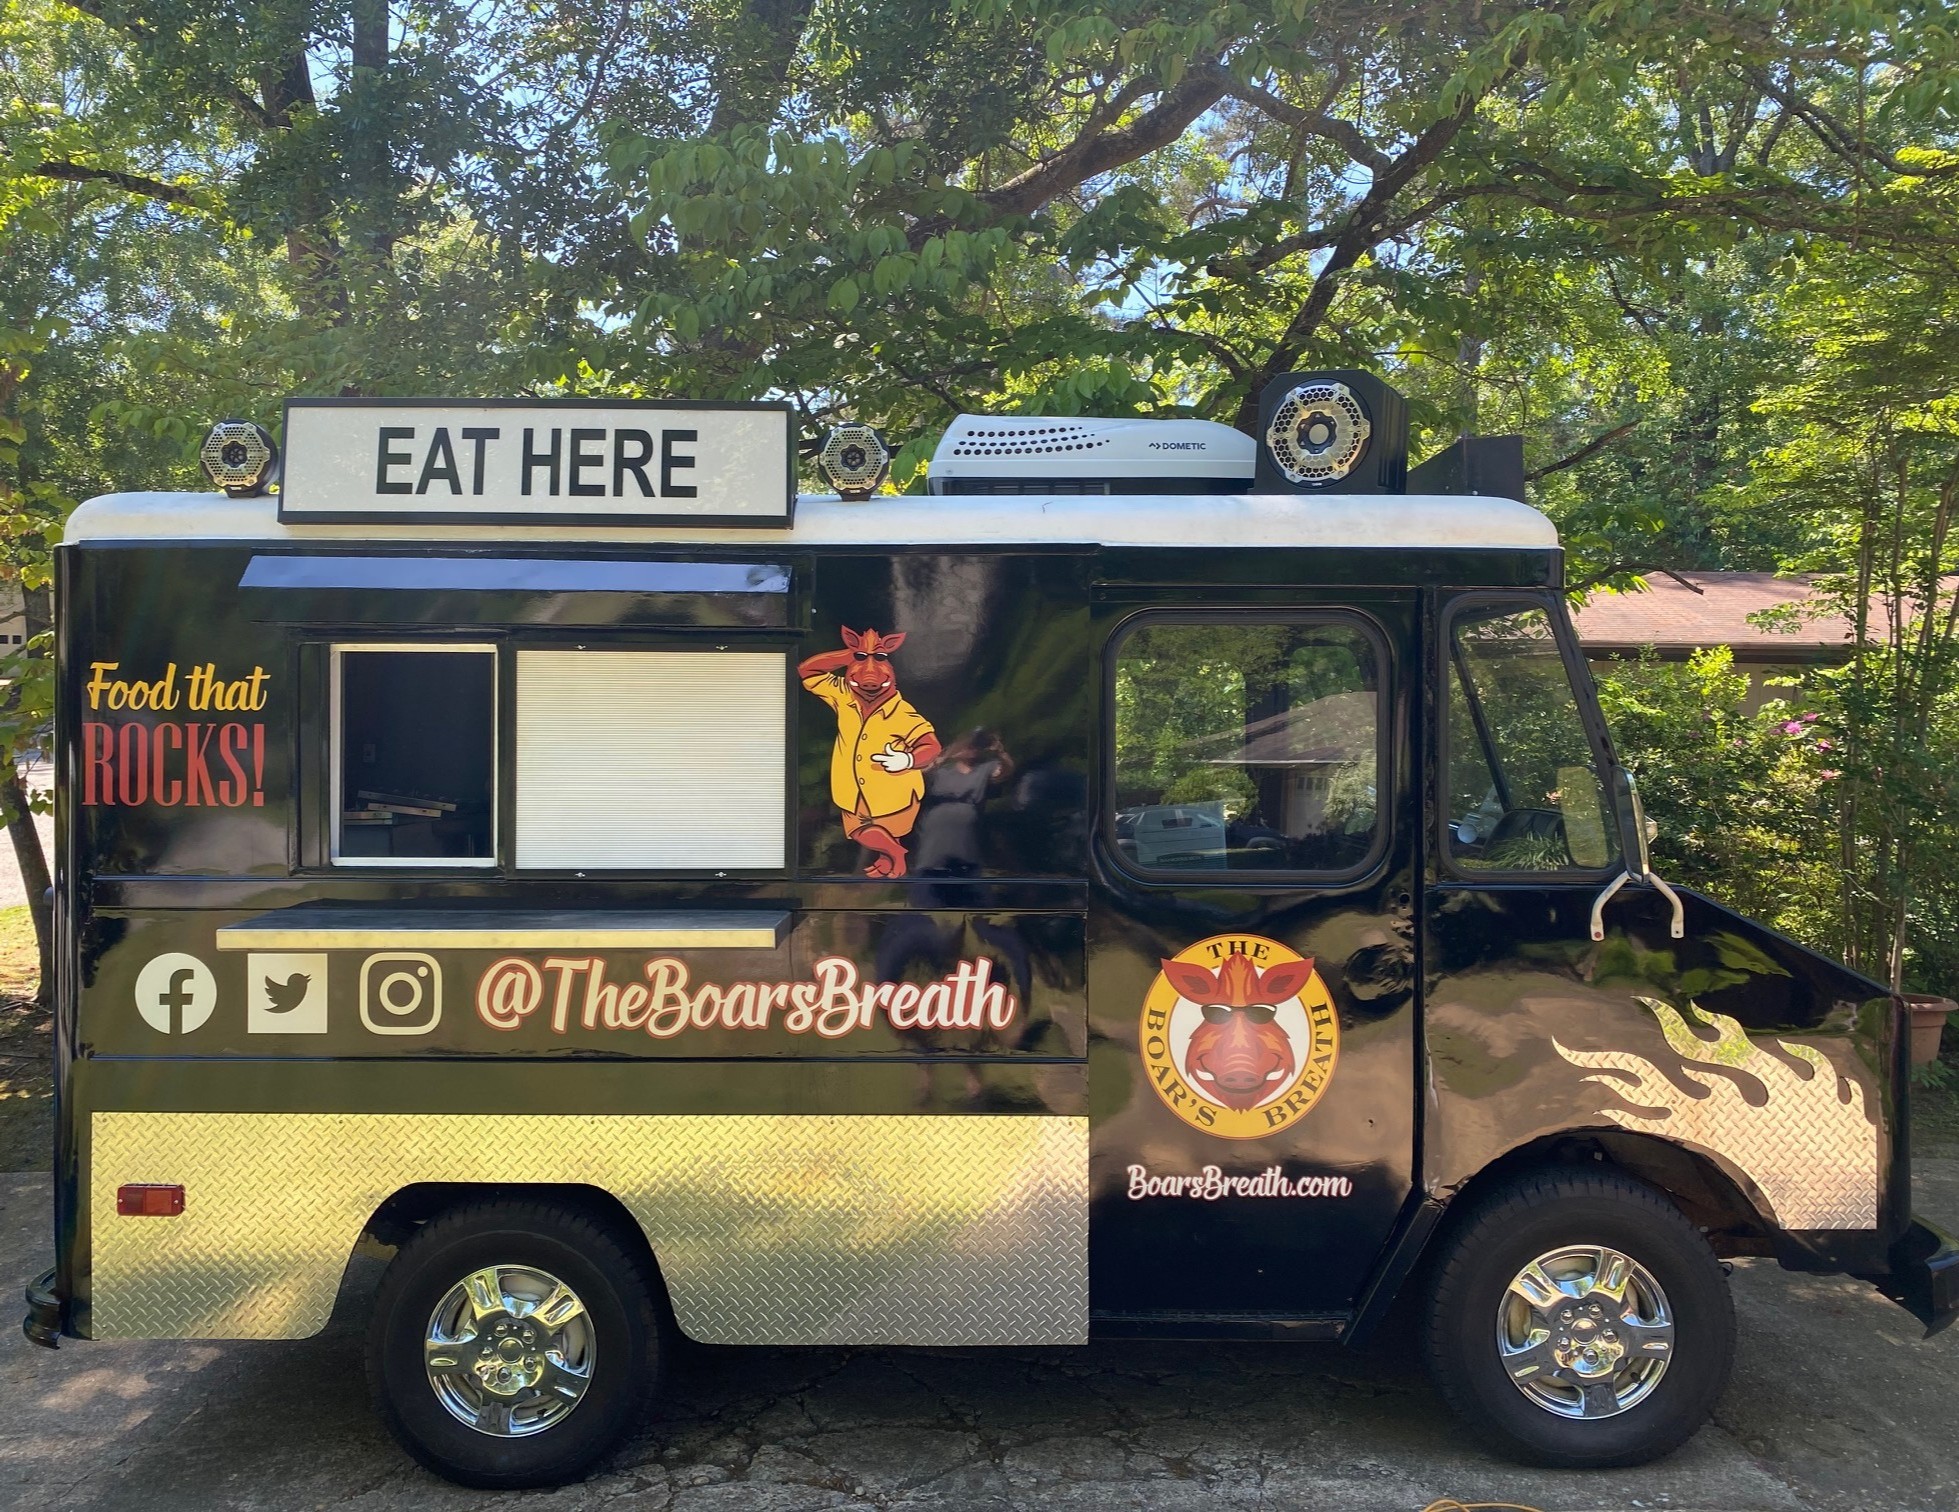 TouristSecrets - 7 Best Food Trucks You Must Try in Los Angeles, California